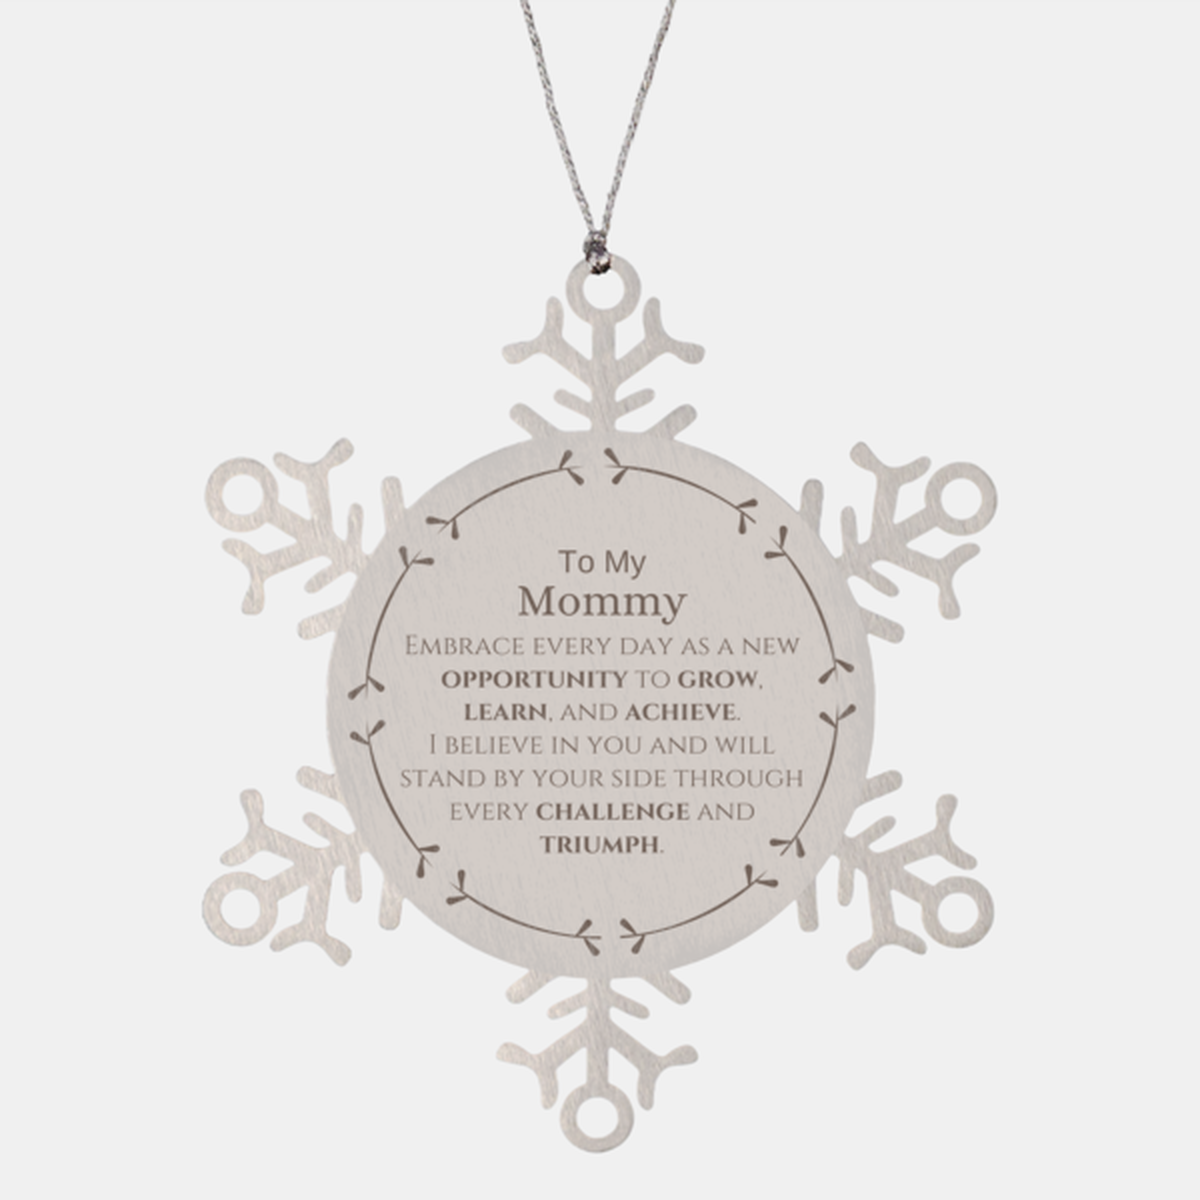 To My Mommy Gifts, I believe in you and will stand by your side, Inspirational Snowflake Ornament For Mommy, Birthday Christmas Motivational Mommy Gifts